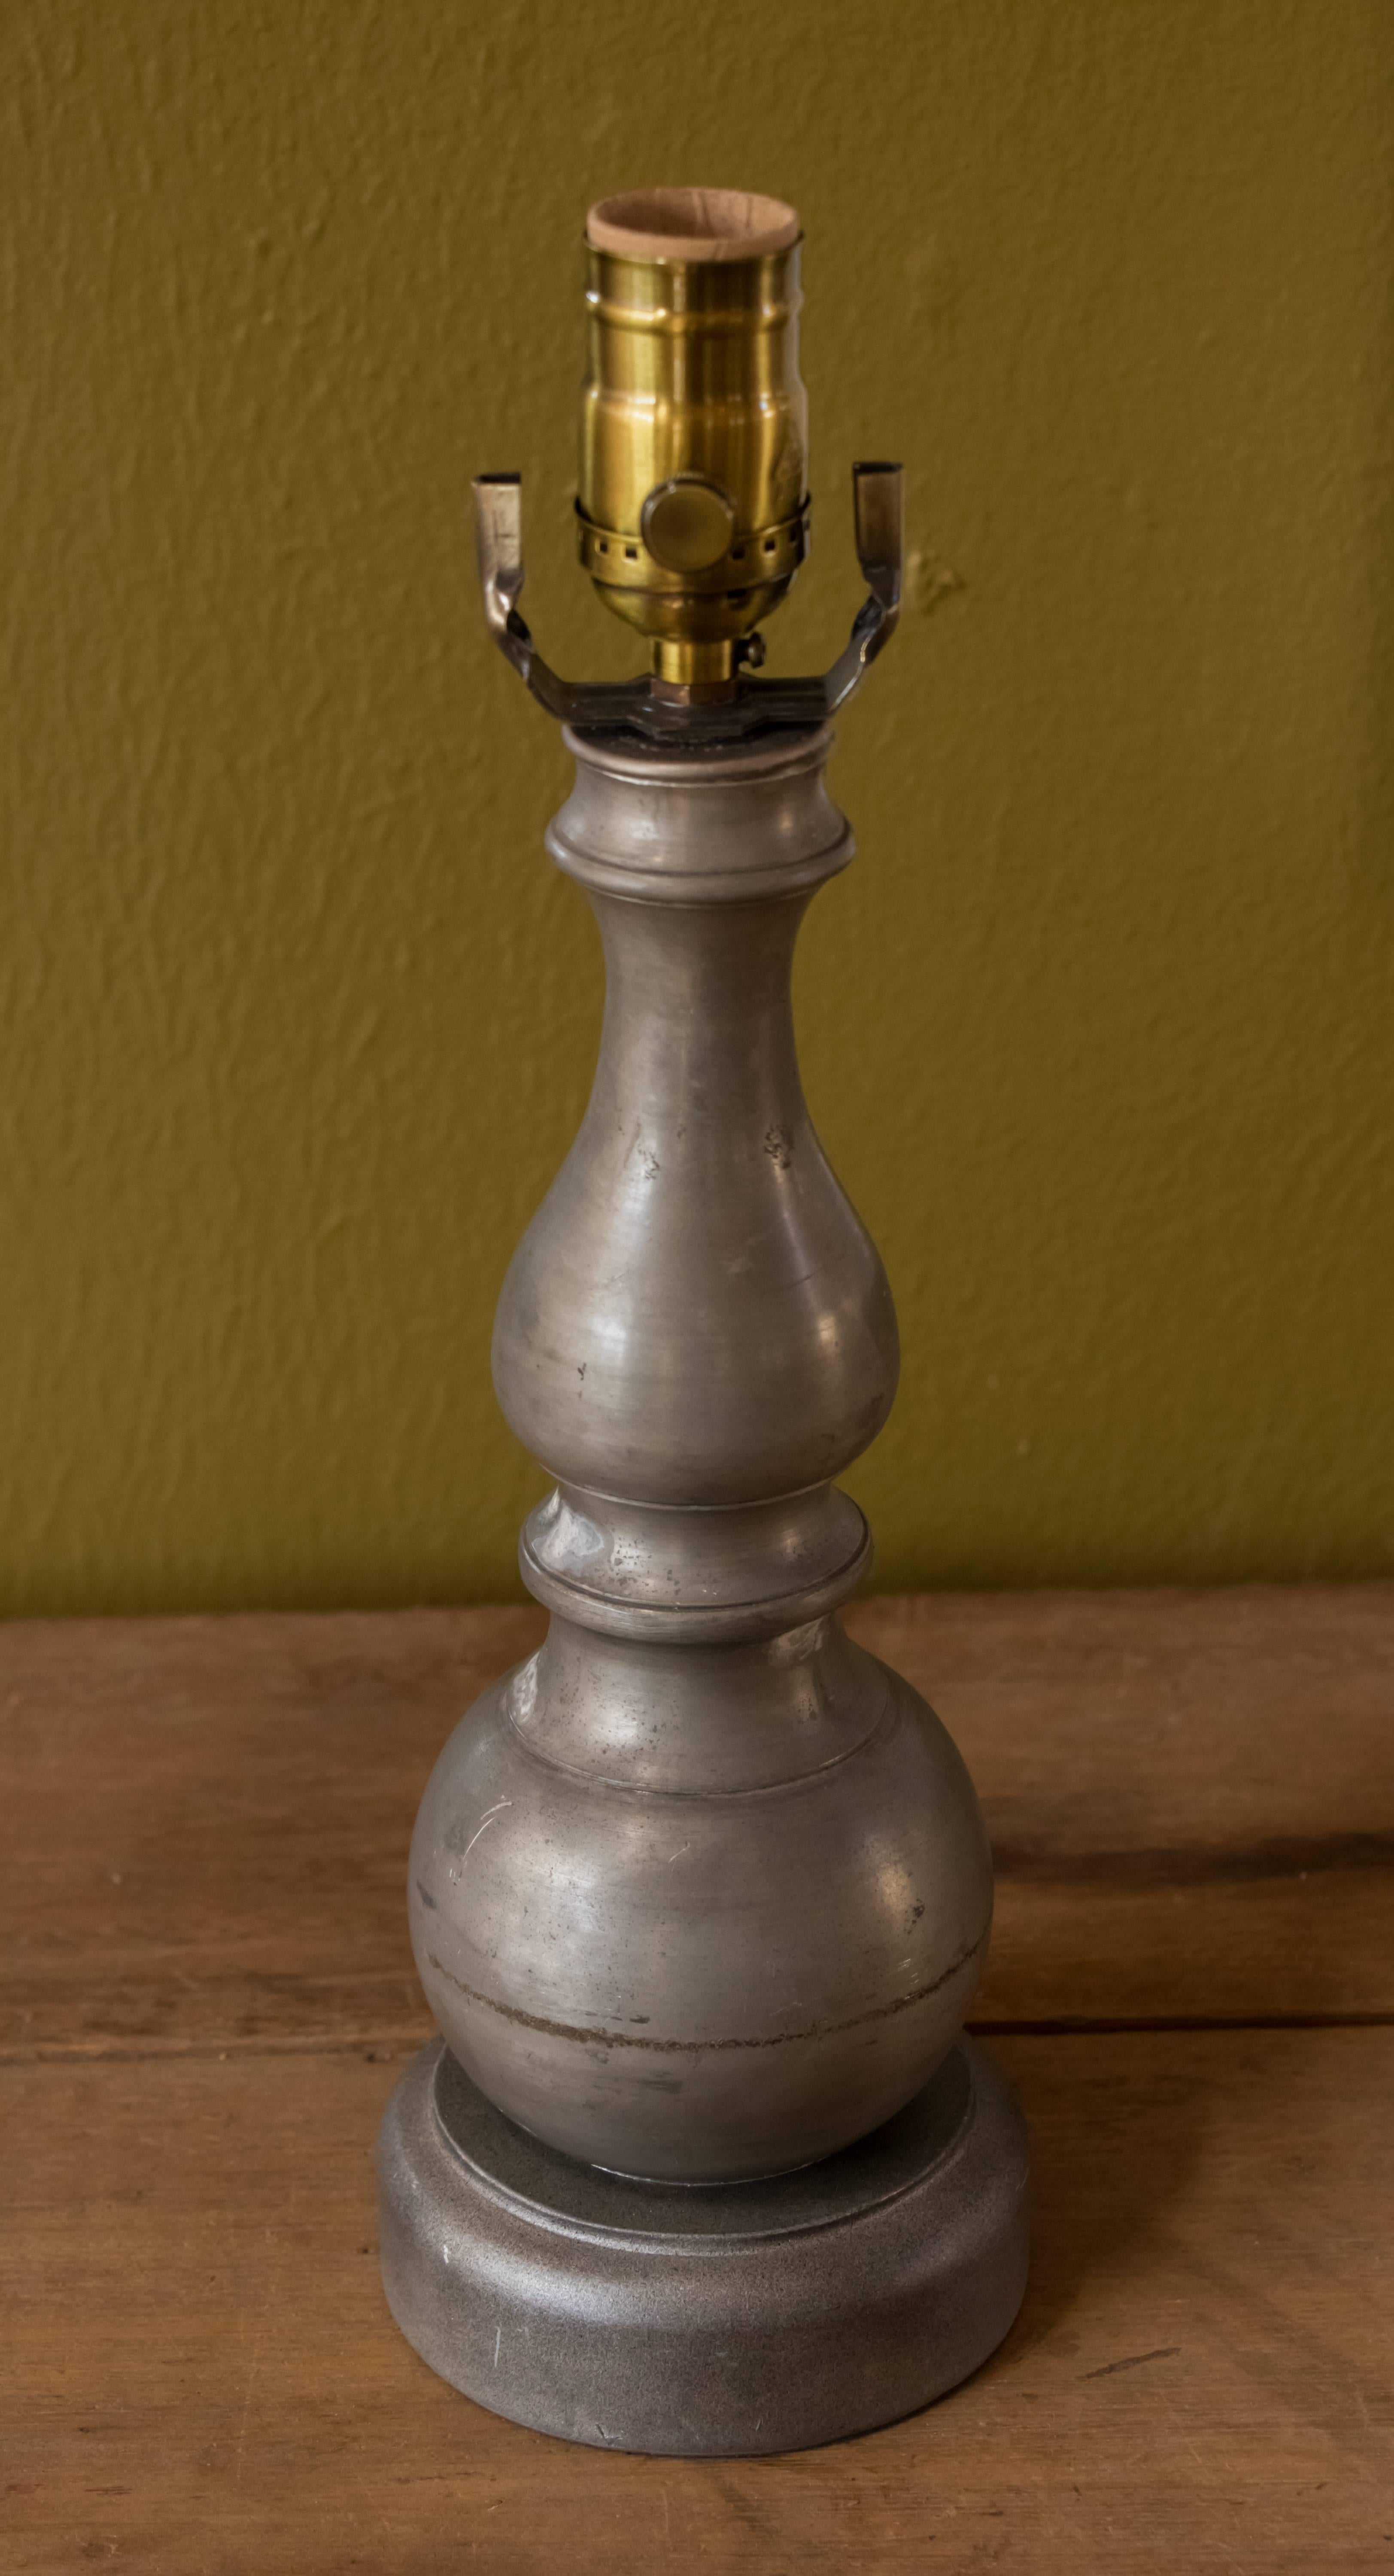 Pair of petite vintage pewter table lamps. Same size diameter and height- one has a slightly longer neck above the ball, as photographed. Beautiful, soft patina on the pewter. Newly wired with all UL listed parts and a harp and saddle configuration.